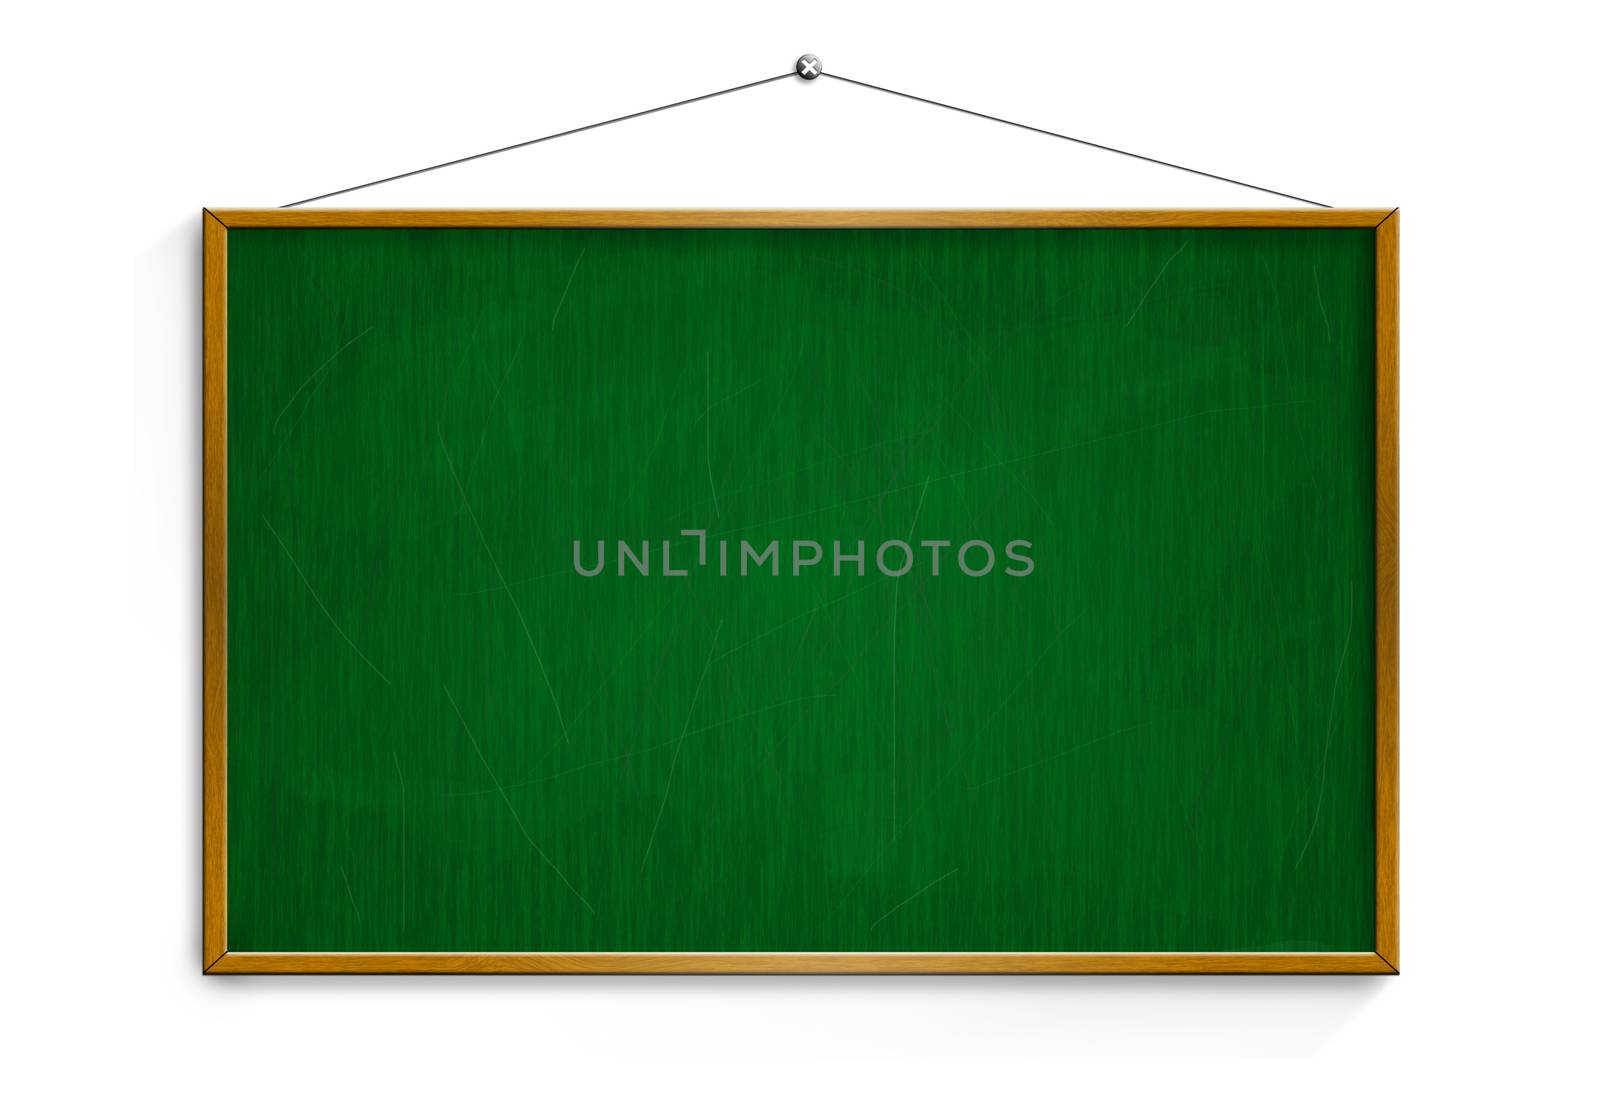 New Black chalk board with wooden frame  isolated on white background.